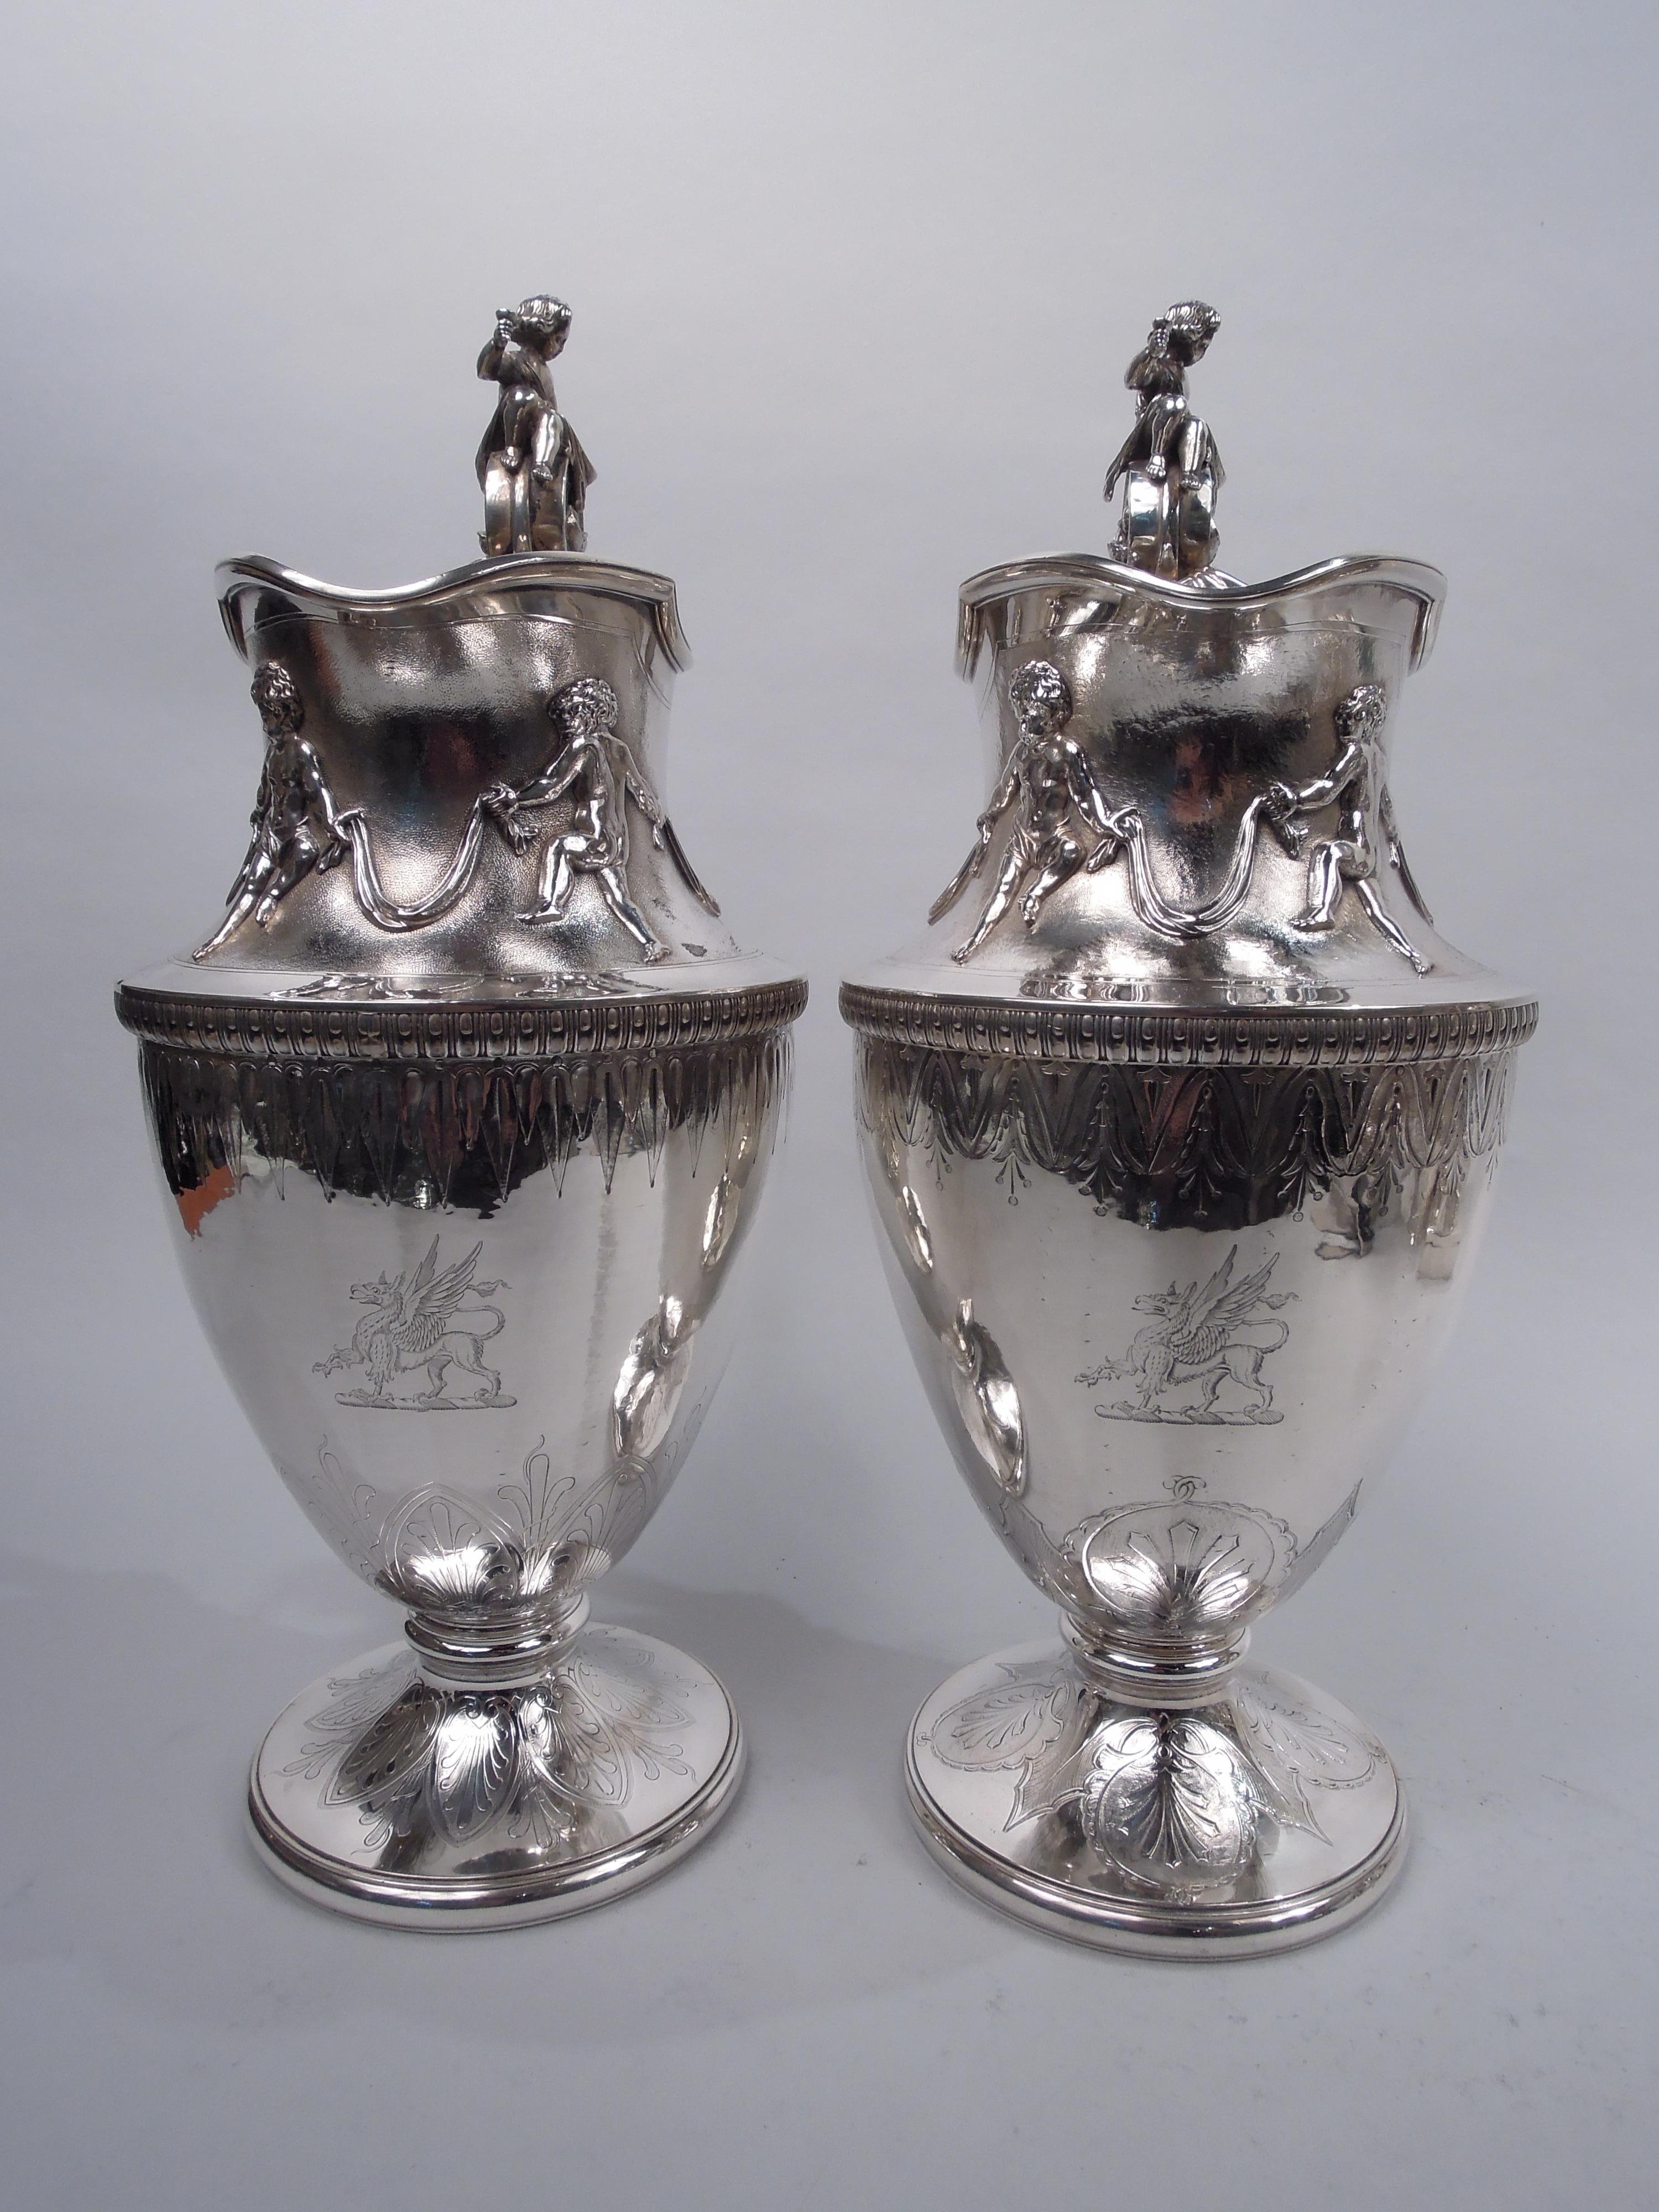 Pair of striking midcentury Classical coin silver ewers. Made by Gorham in Providence, ca 1860. Each: Ovoid bowl with helmet mouth and raised foot. On neck applied frieze with ring of Bacchic boys gripping drapery swags; below applied bead-and-reel